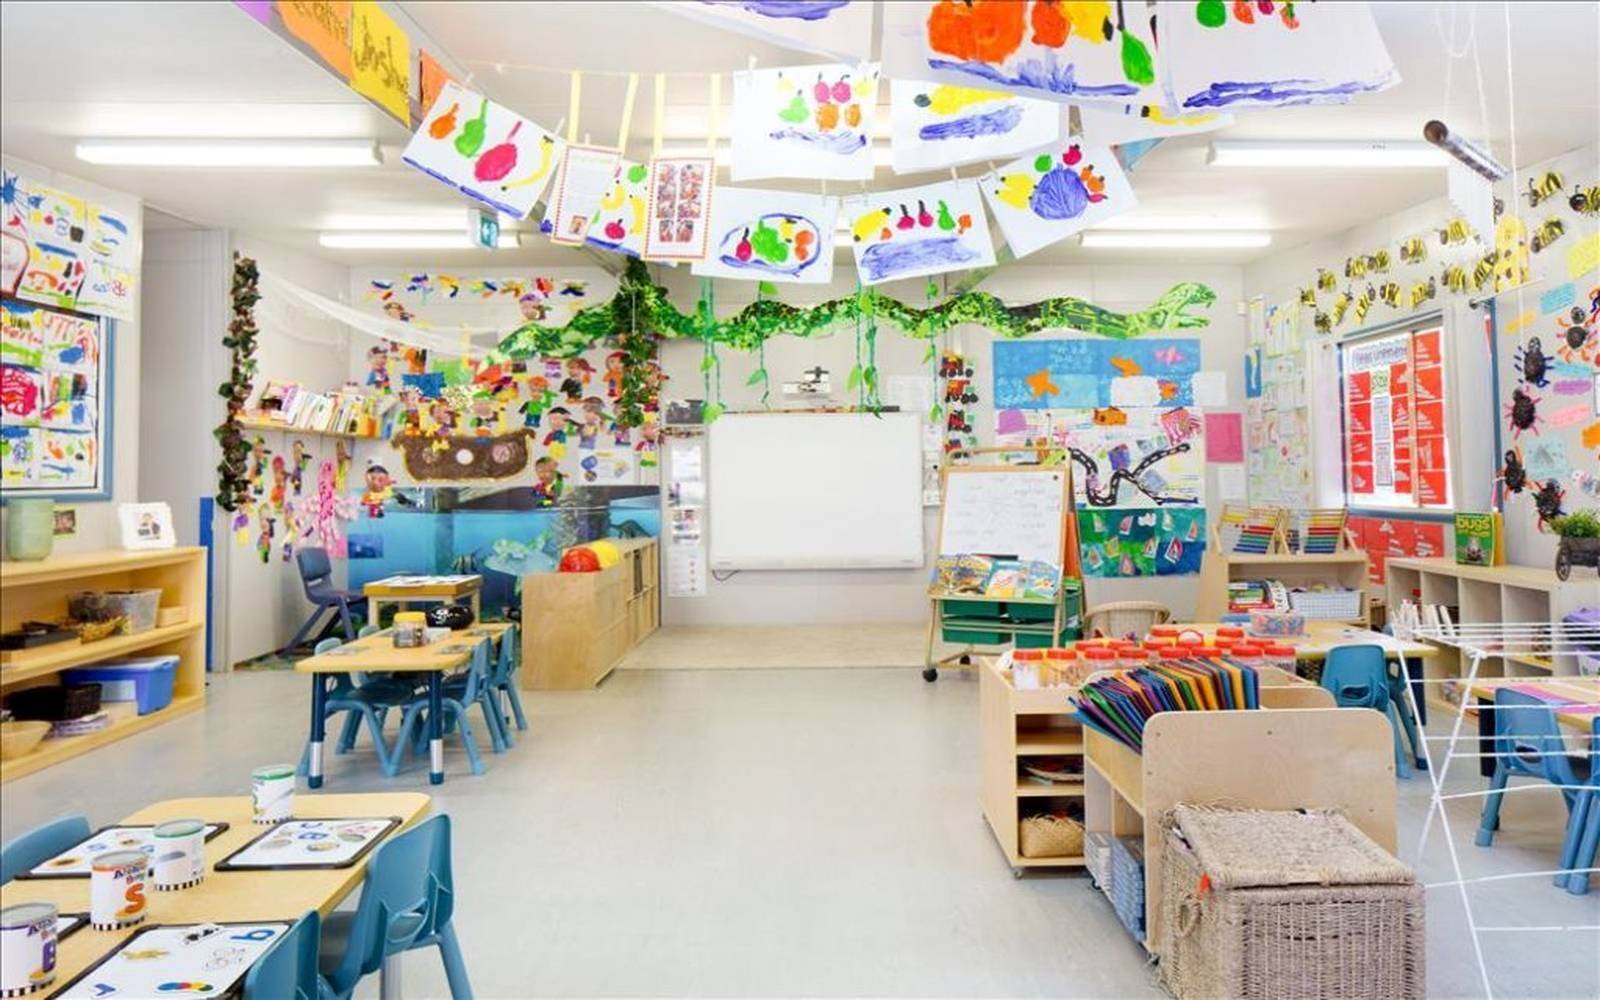 Manly Vale Early Learning Services